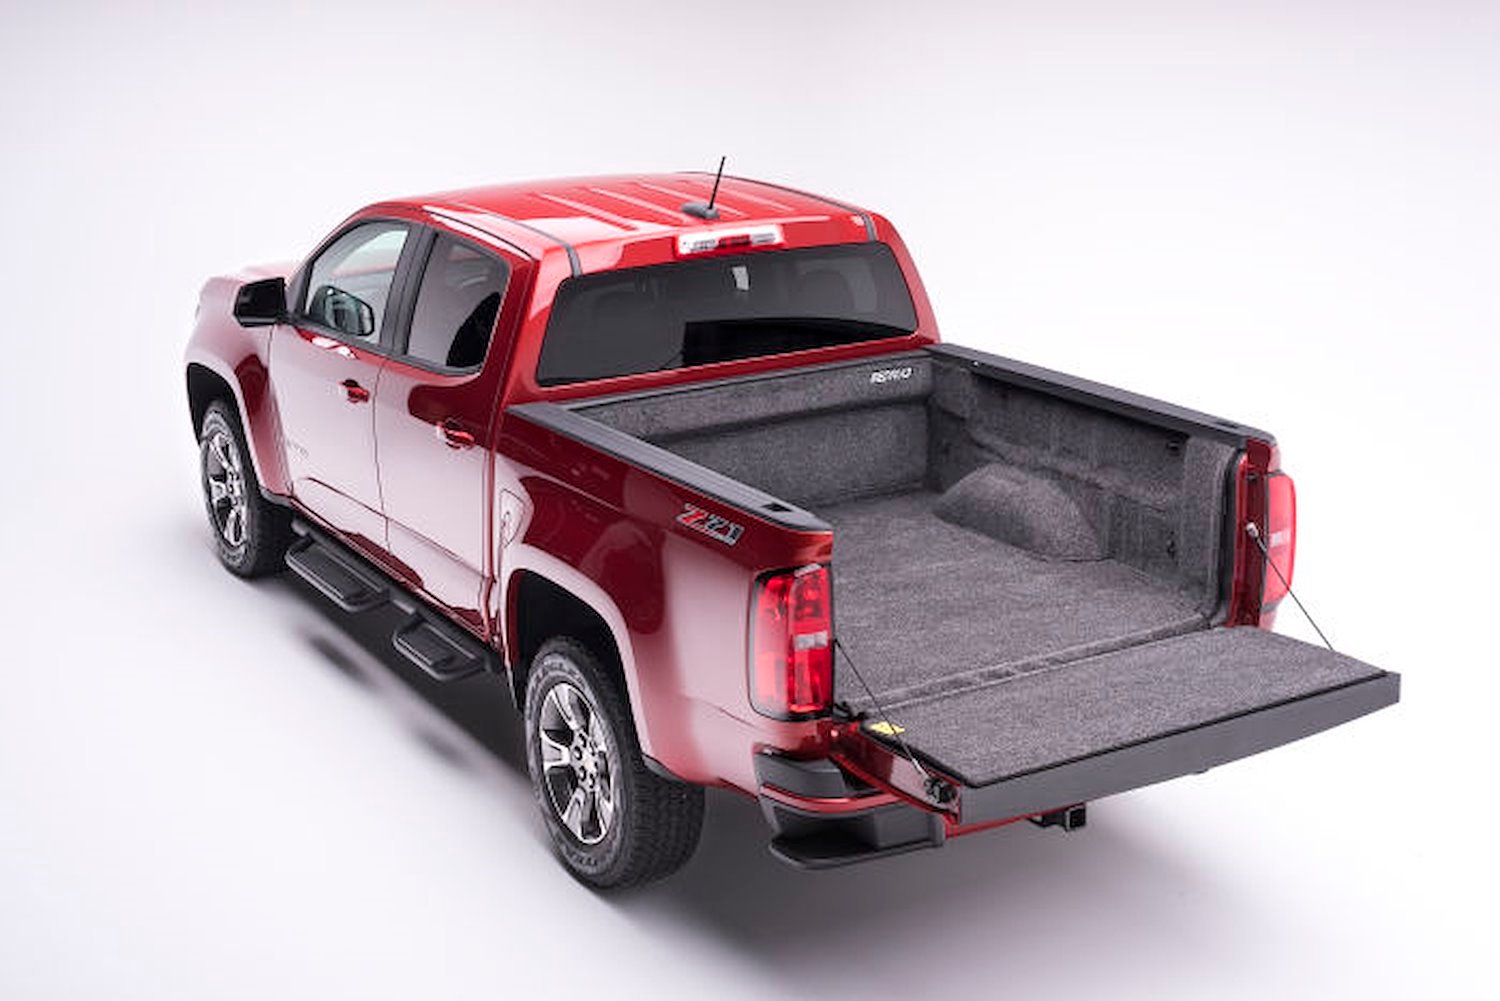 Truck Bed Liner Fits Select Chevy Colorado, GMC Canyon Crew Cab [61.700 in. Bed]